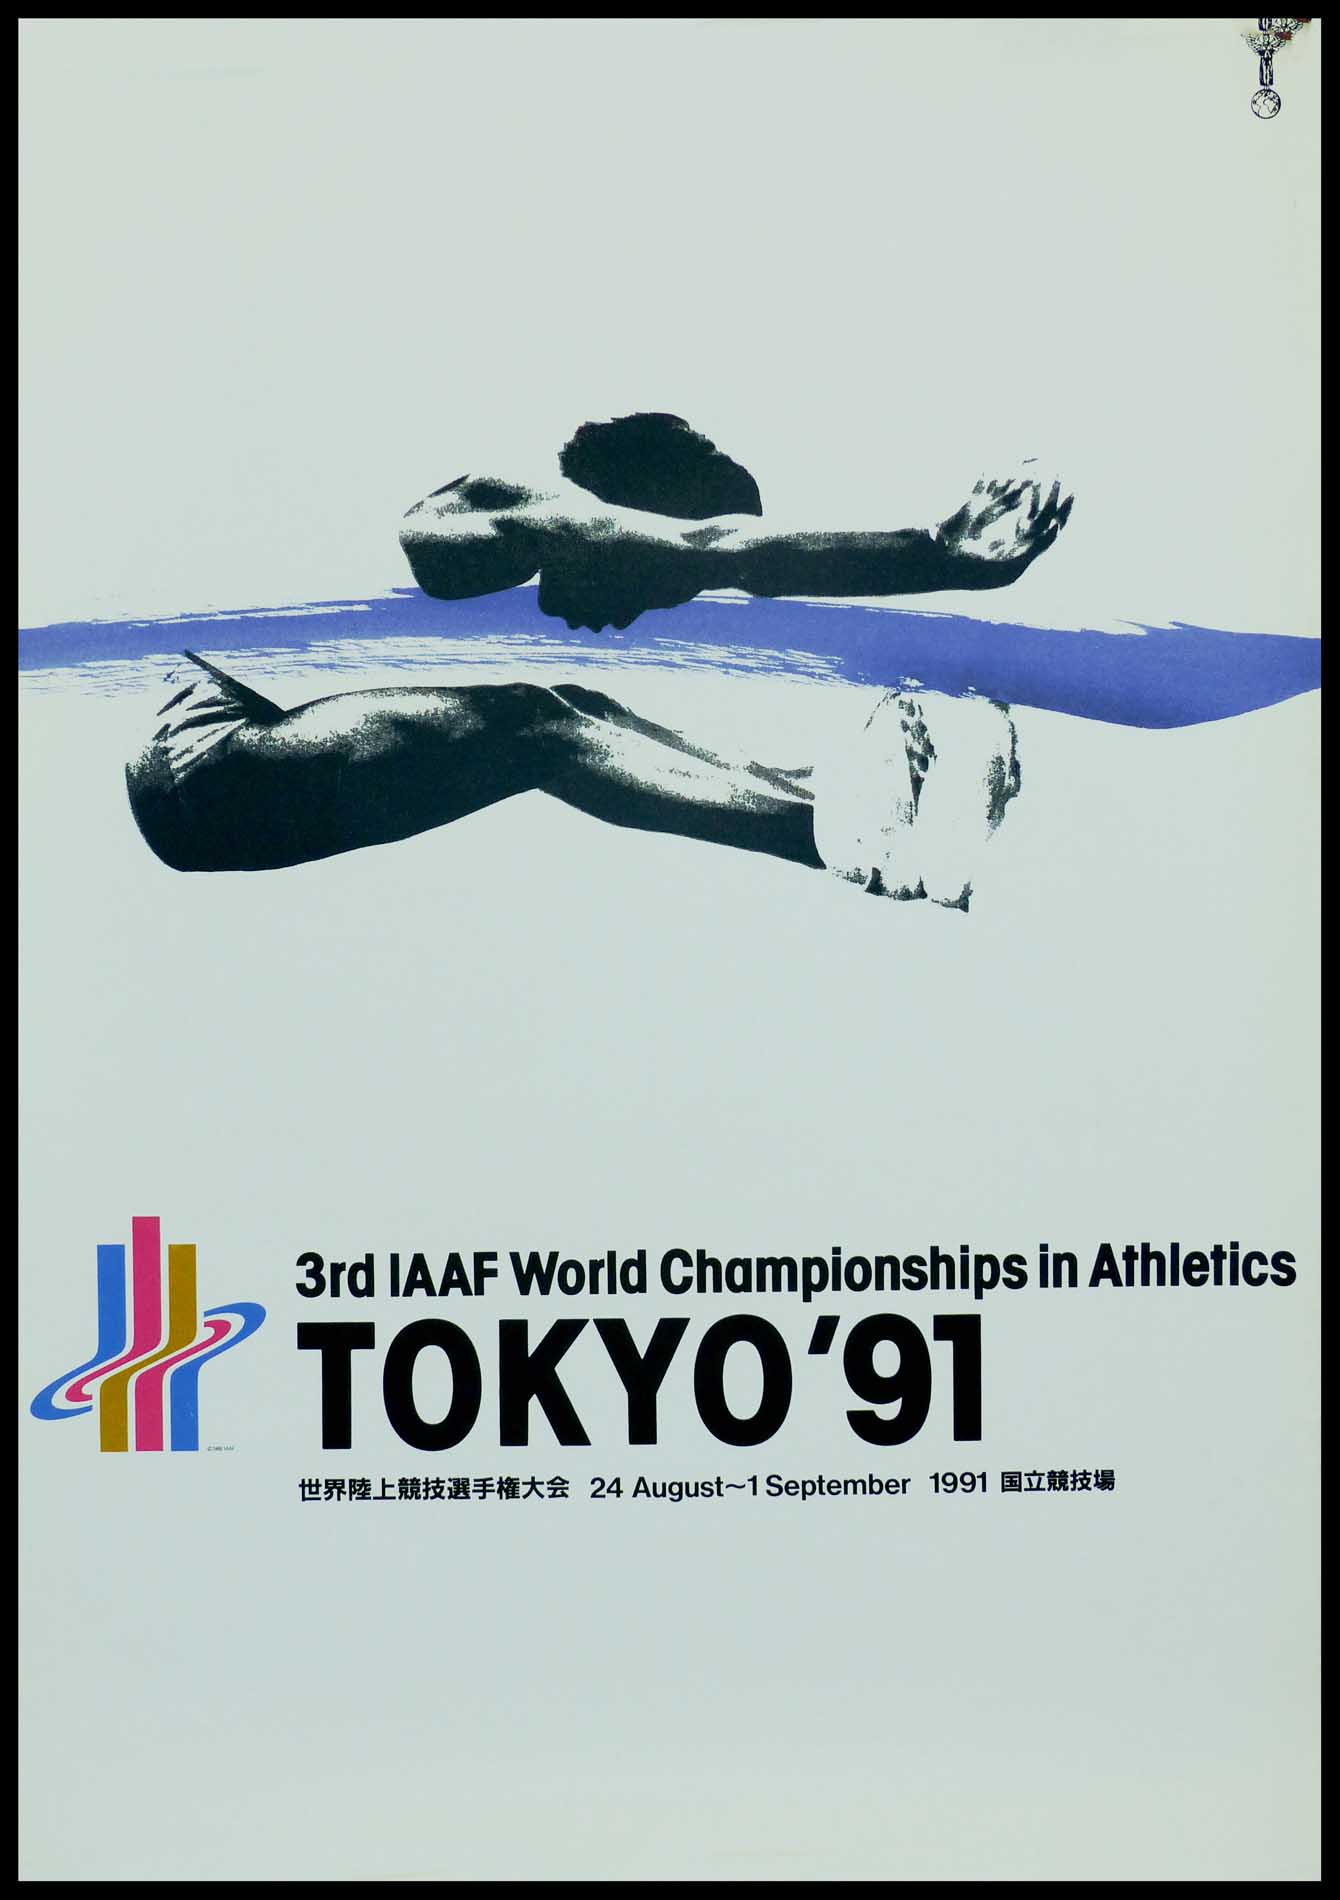 (alt="Original vintage poster 3rd IAFF World Championships In Athletics in Tokyo 1991, realised by unkown and printed by IAAF")